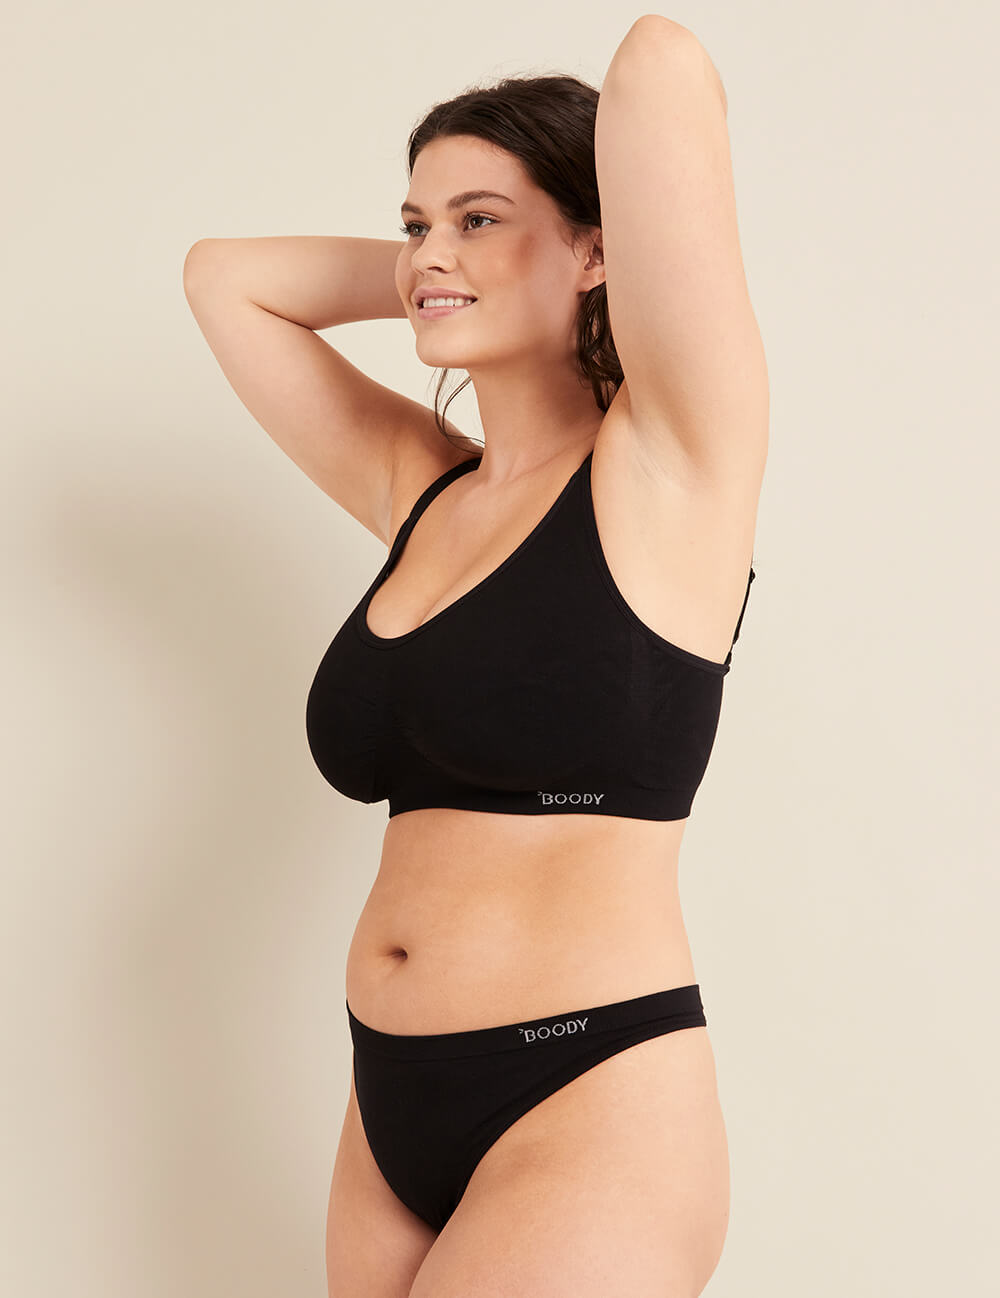 Boody Full Bust Wireless Bra with matching underwear in Black Side View